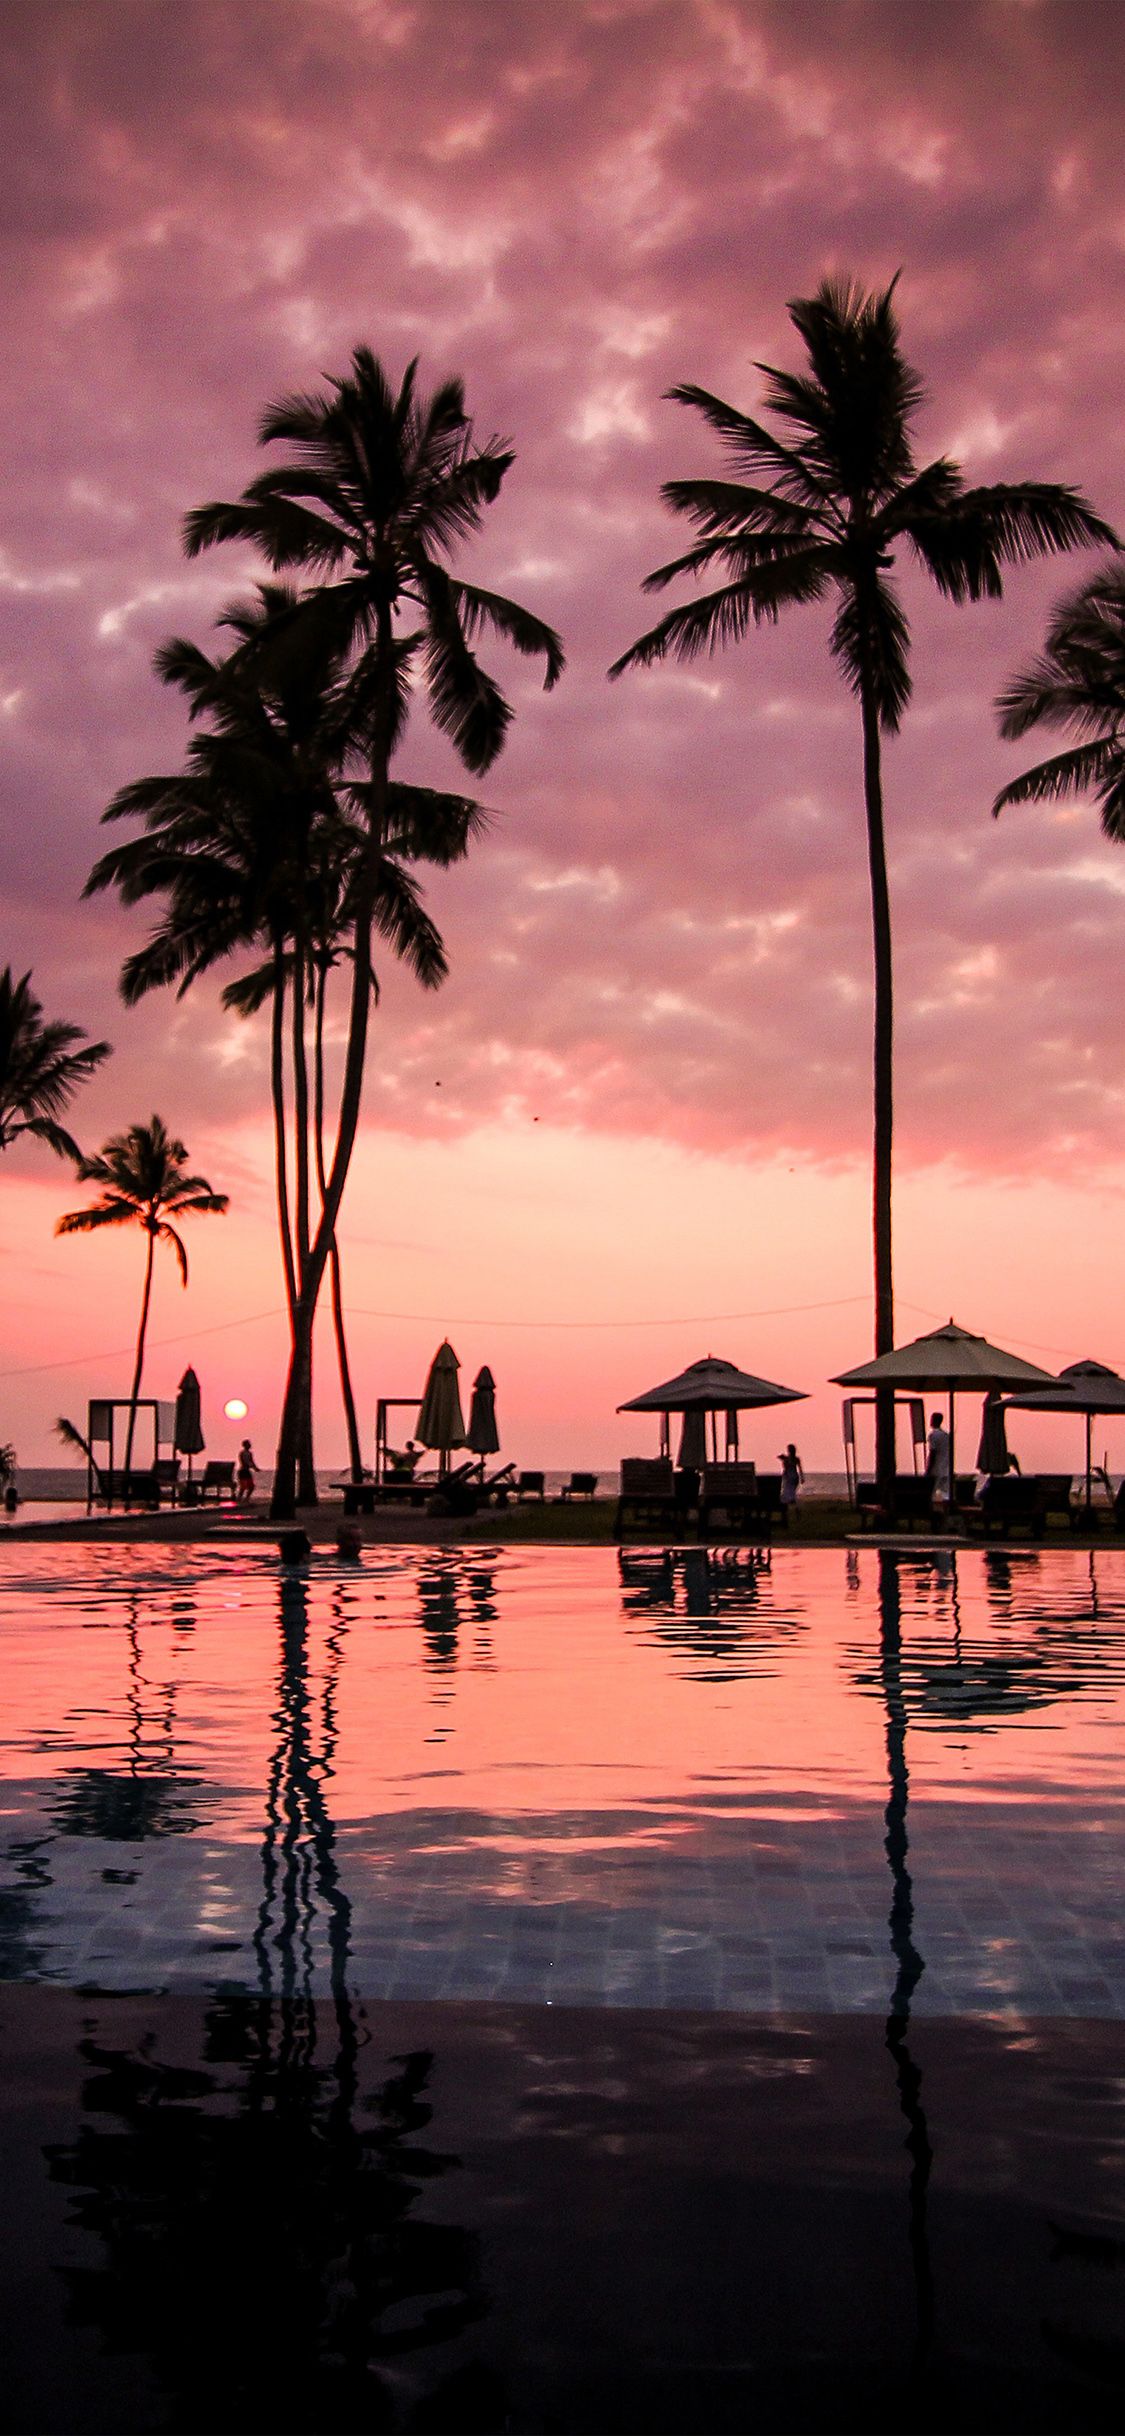 A beautiful sunset over a pool with palm trees and beach chairs. - Beach, happy, sunset